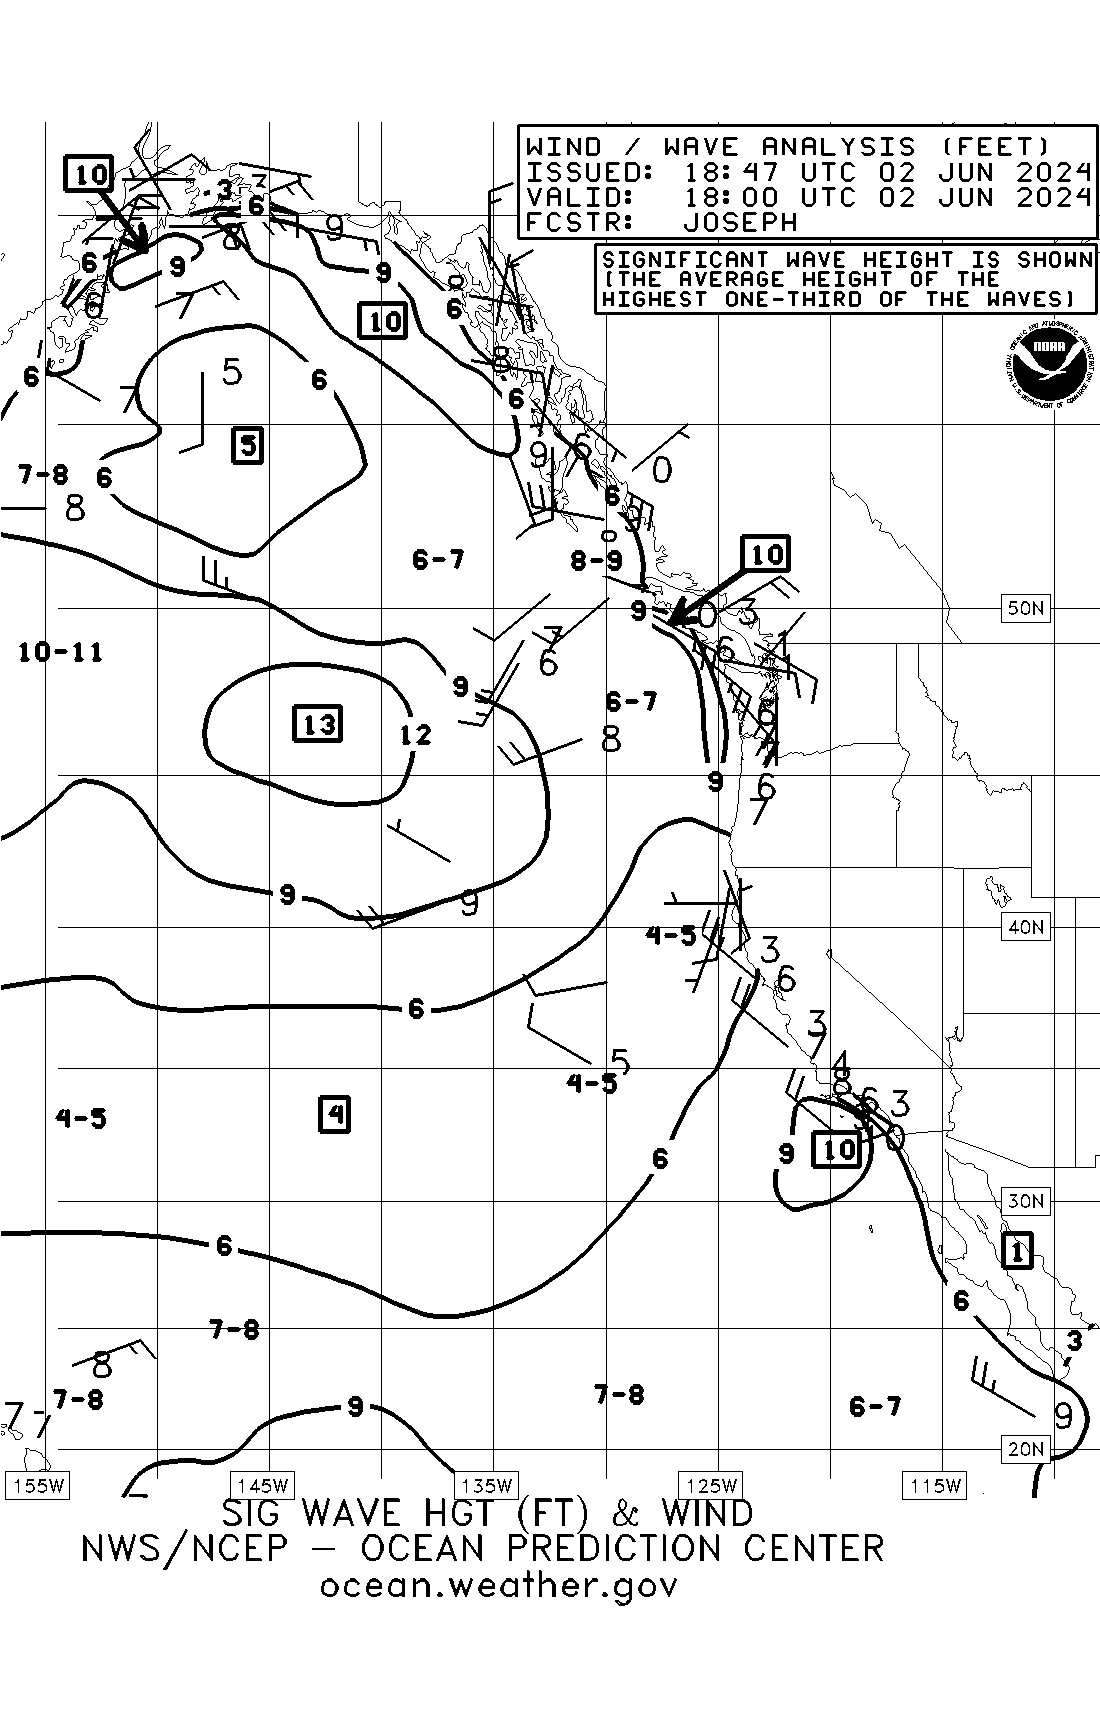 Image of Pacific Regional Sea State, every 6 hours